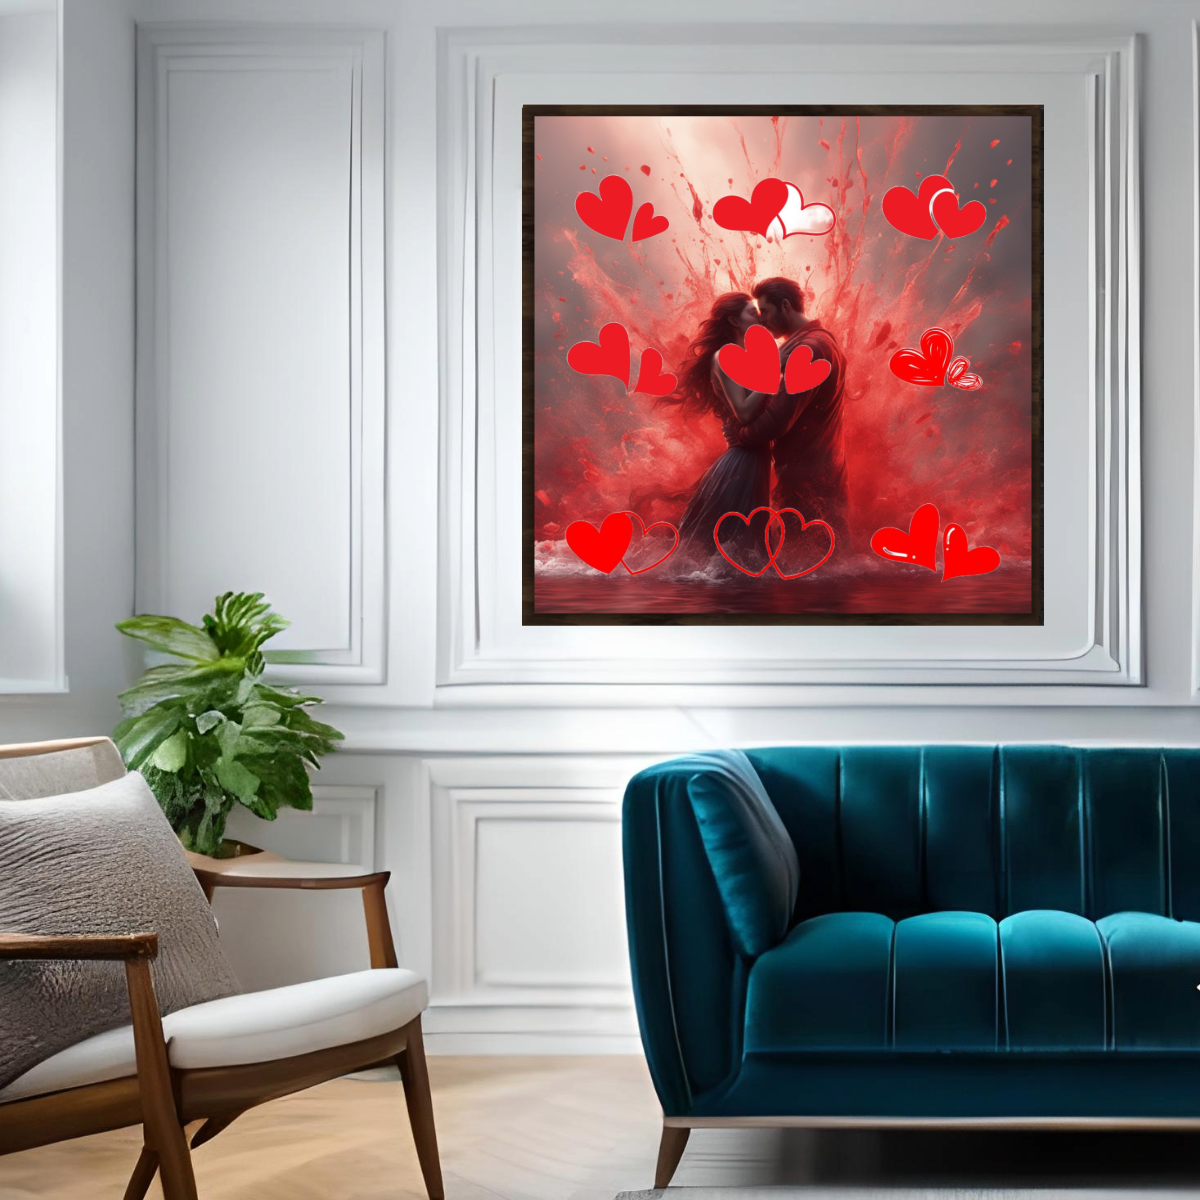 Wall Art THE KISS in RED Canvas Print Painting Original Giclee 32X32 + Frame Love Nice Beauty Fun Design Fit Red House Gift Ready Hang Living